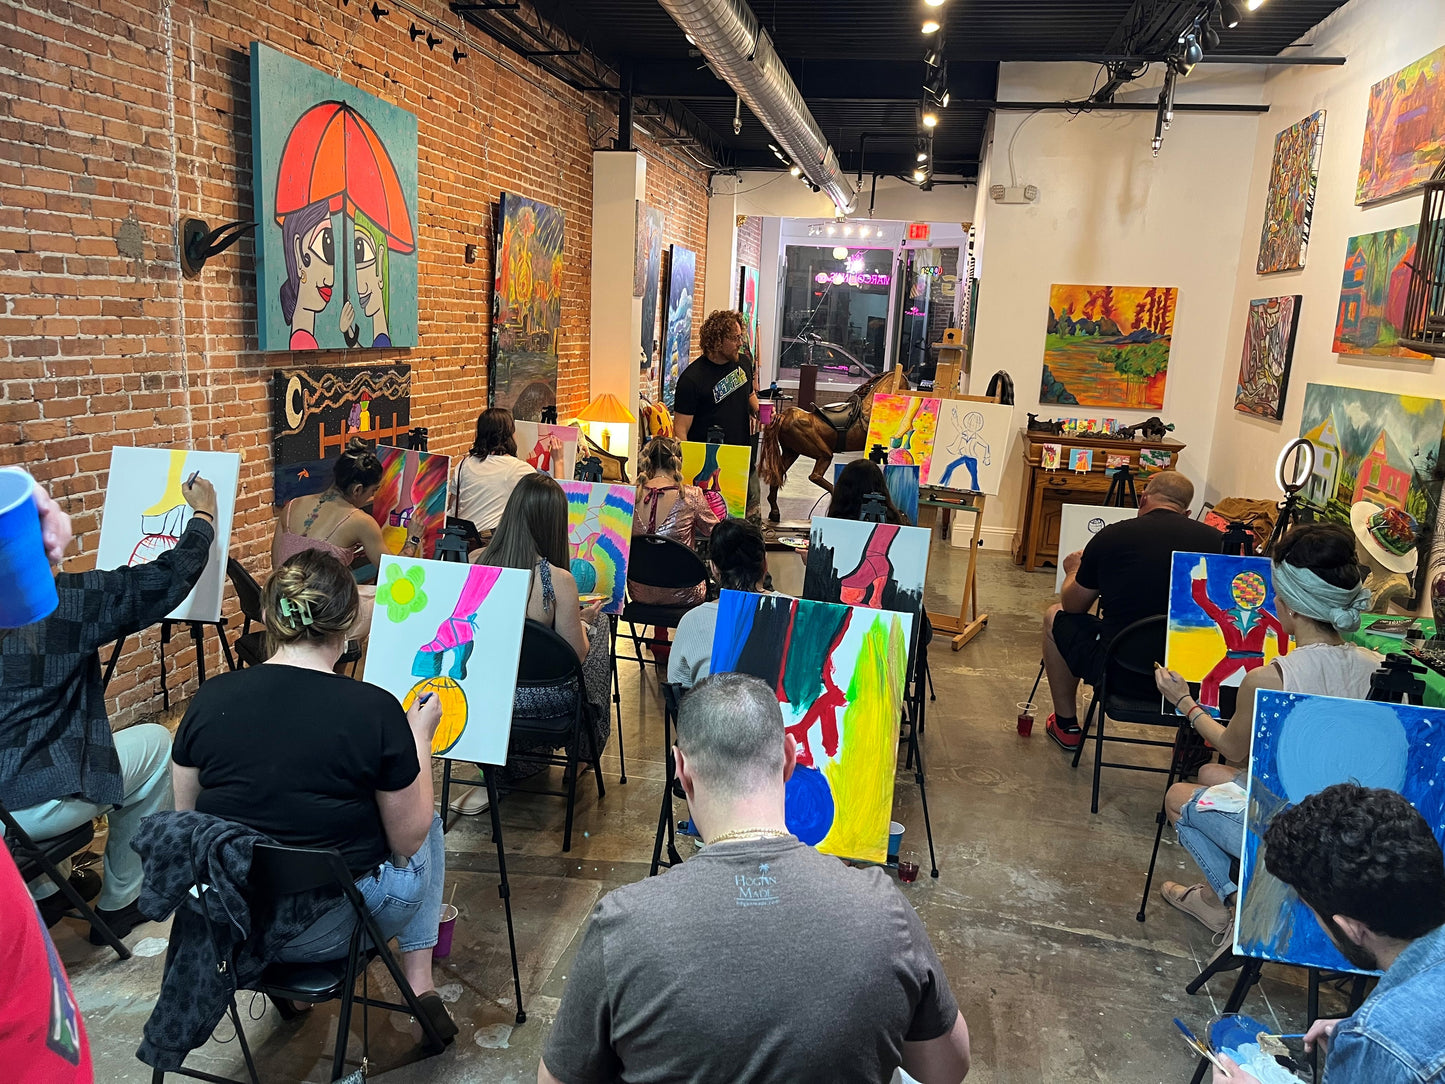 Mother's Day Sip and Paint Party: Van Gogh's Sunflowers Edition